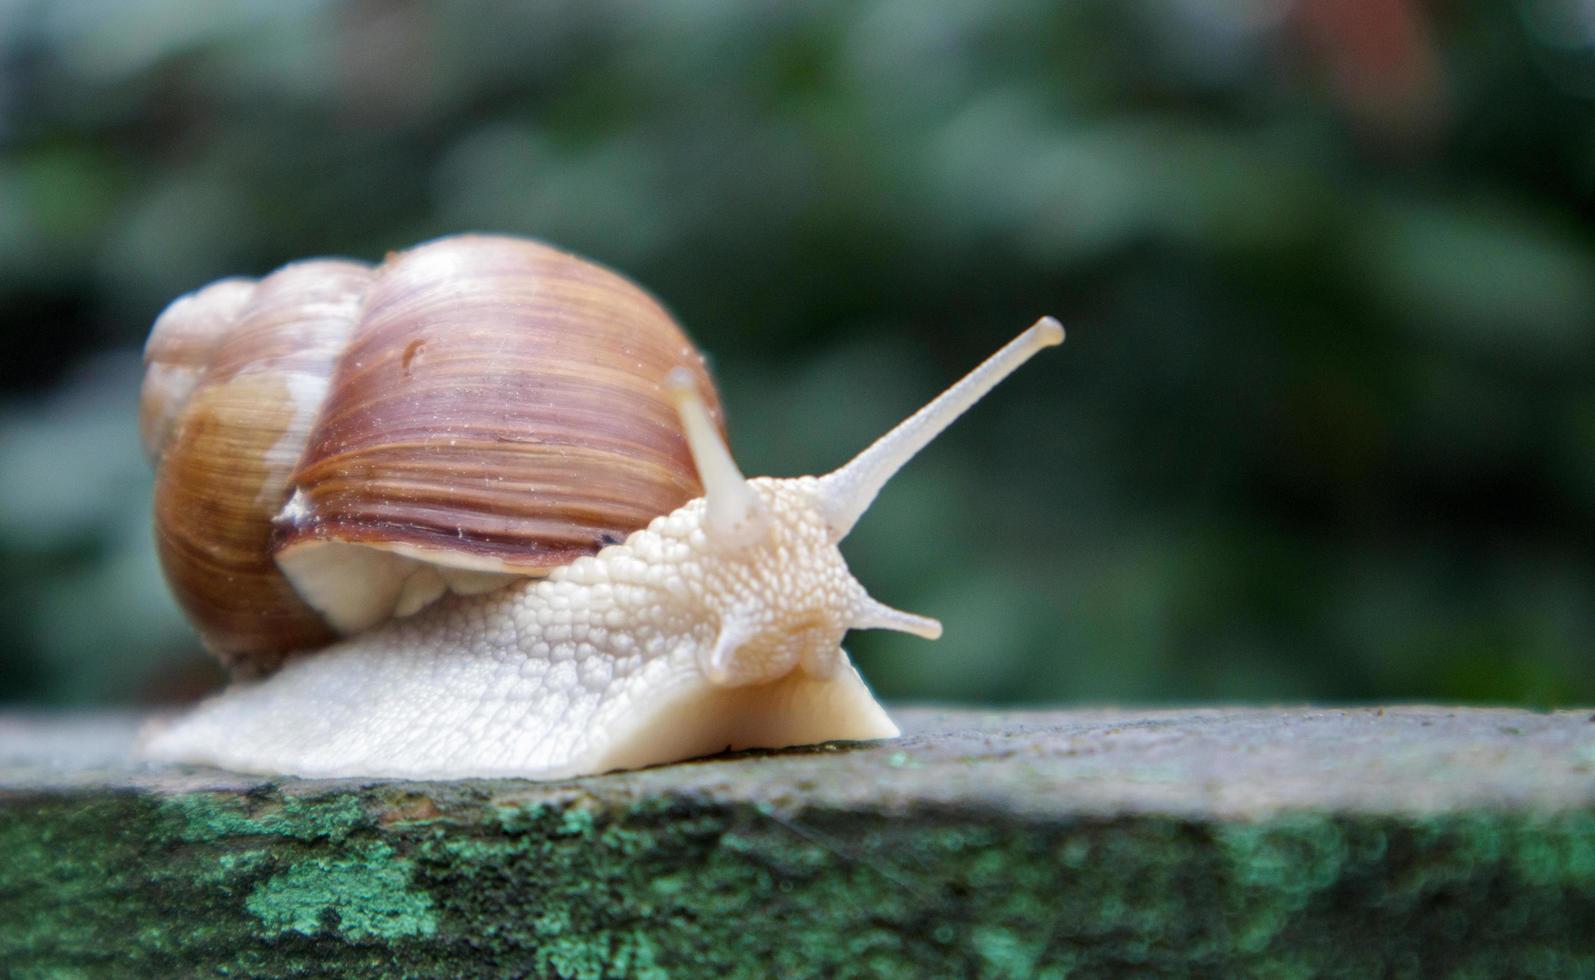 Large crawling garden snail with a striped shell. photo